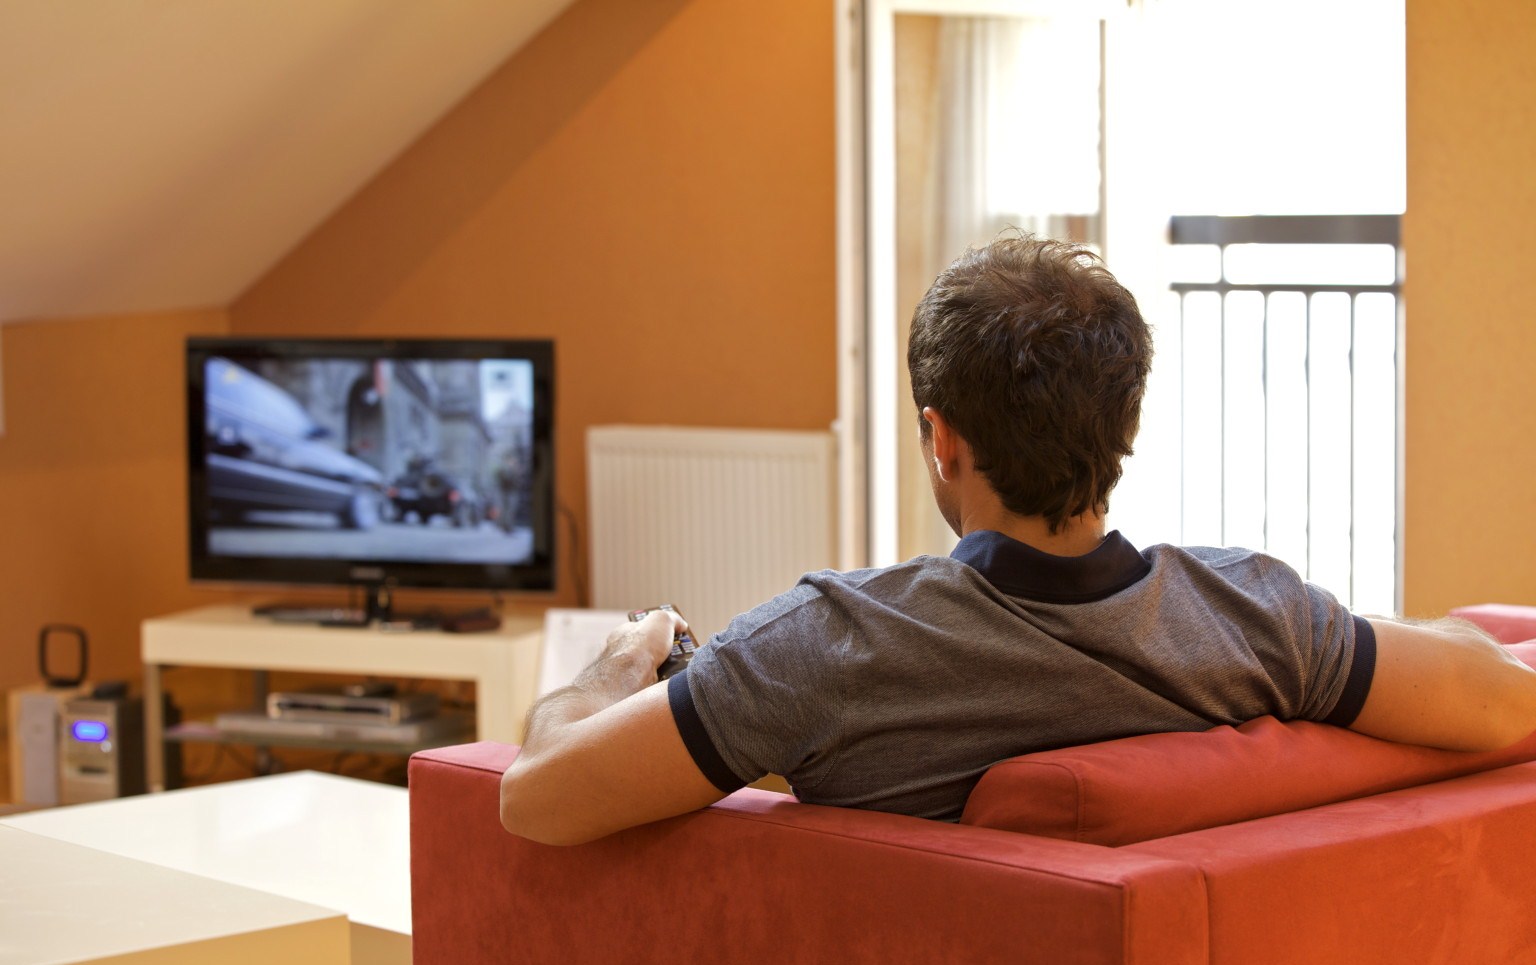 Rear view of young man watching television; Shutterstock ID 67308952; PO: The Huffington Post; Job: The Huffington Post; Client: The Huffington Post; Other: The Huffington Post